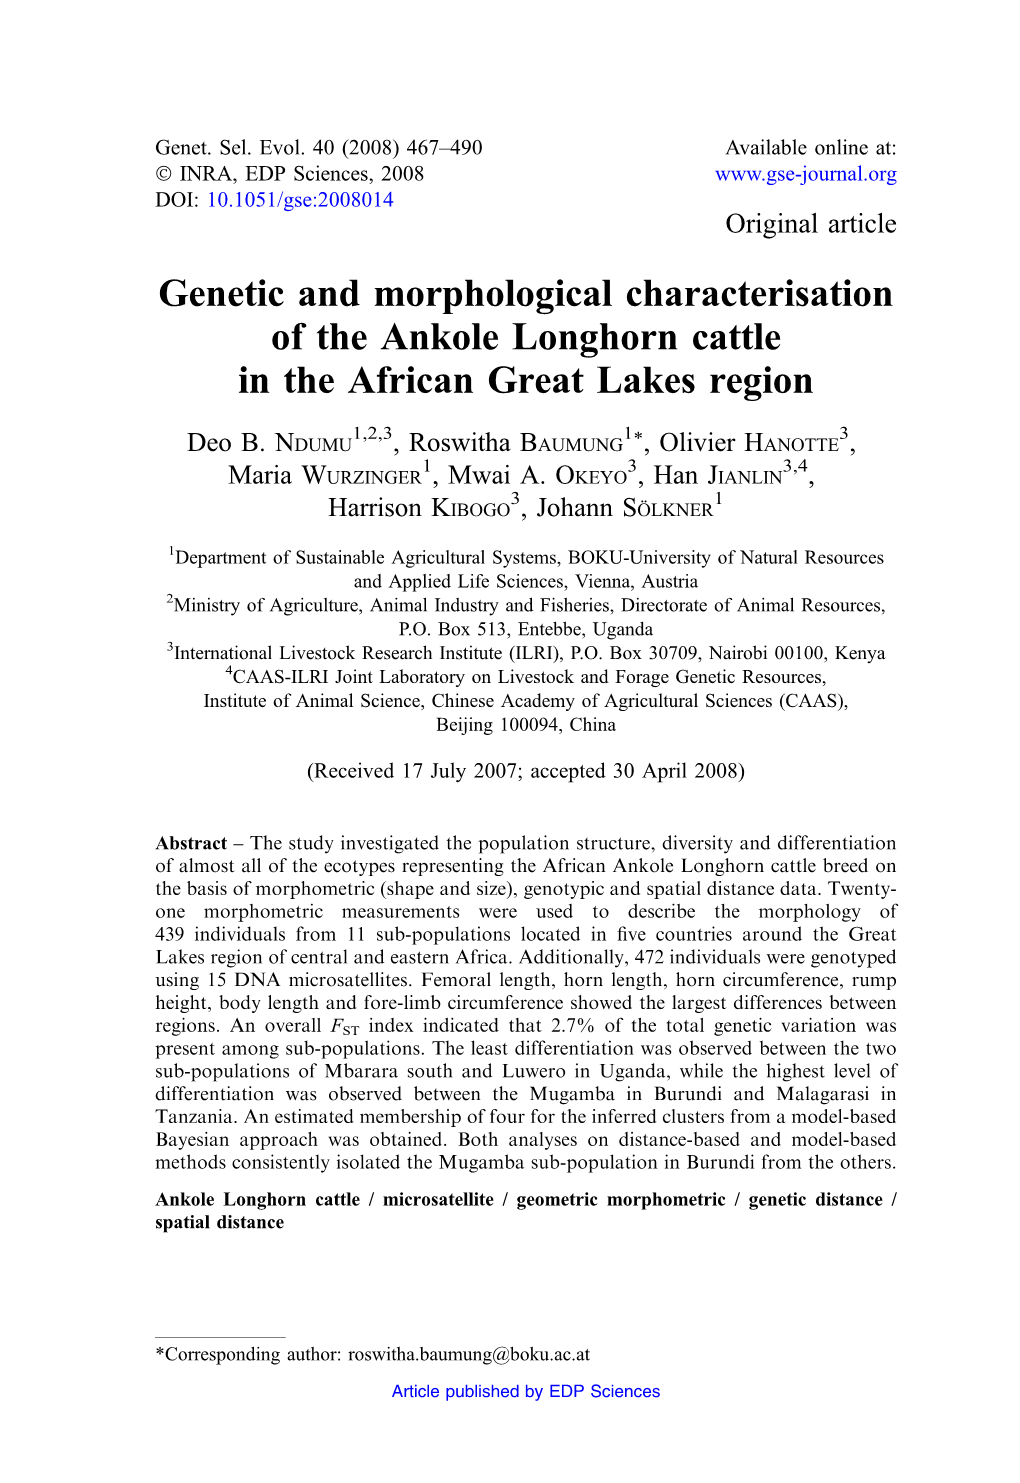 Genetic and Morphological Characterisation of the Ankole Longhorn Cattle in the African Great Lakes Region